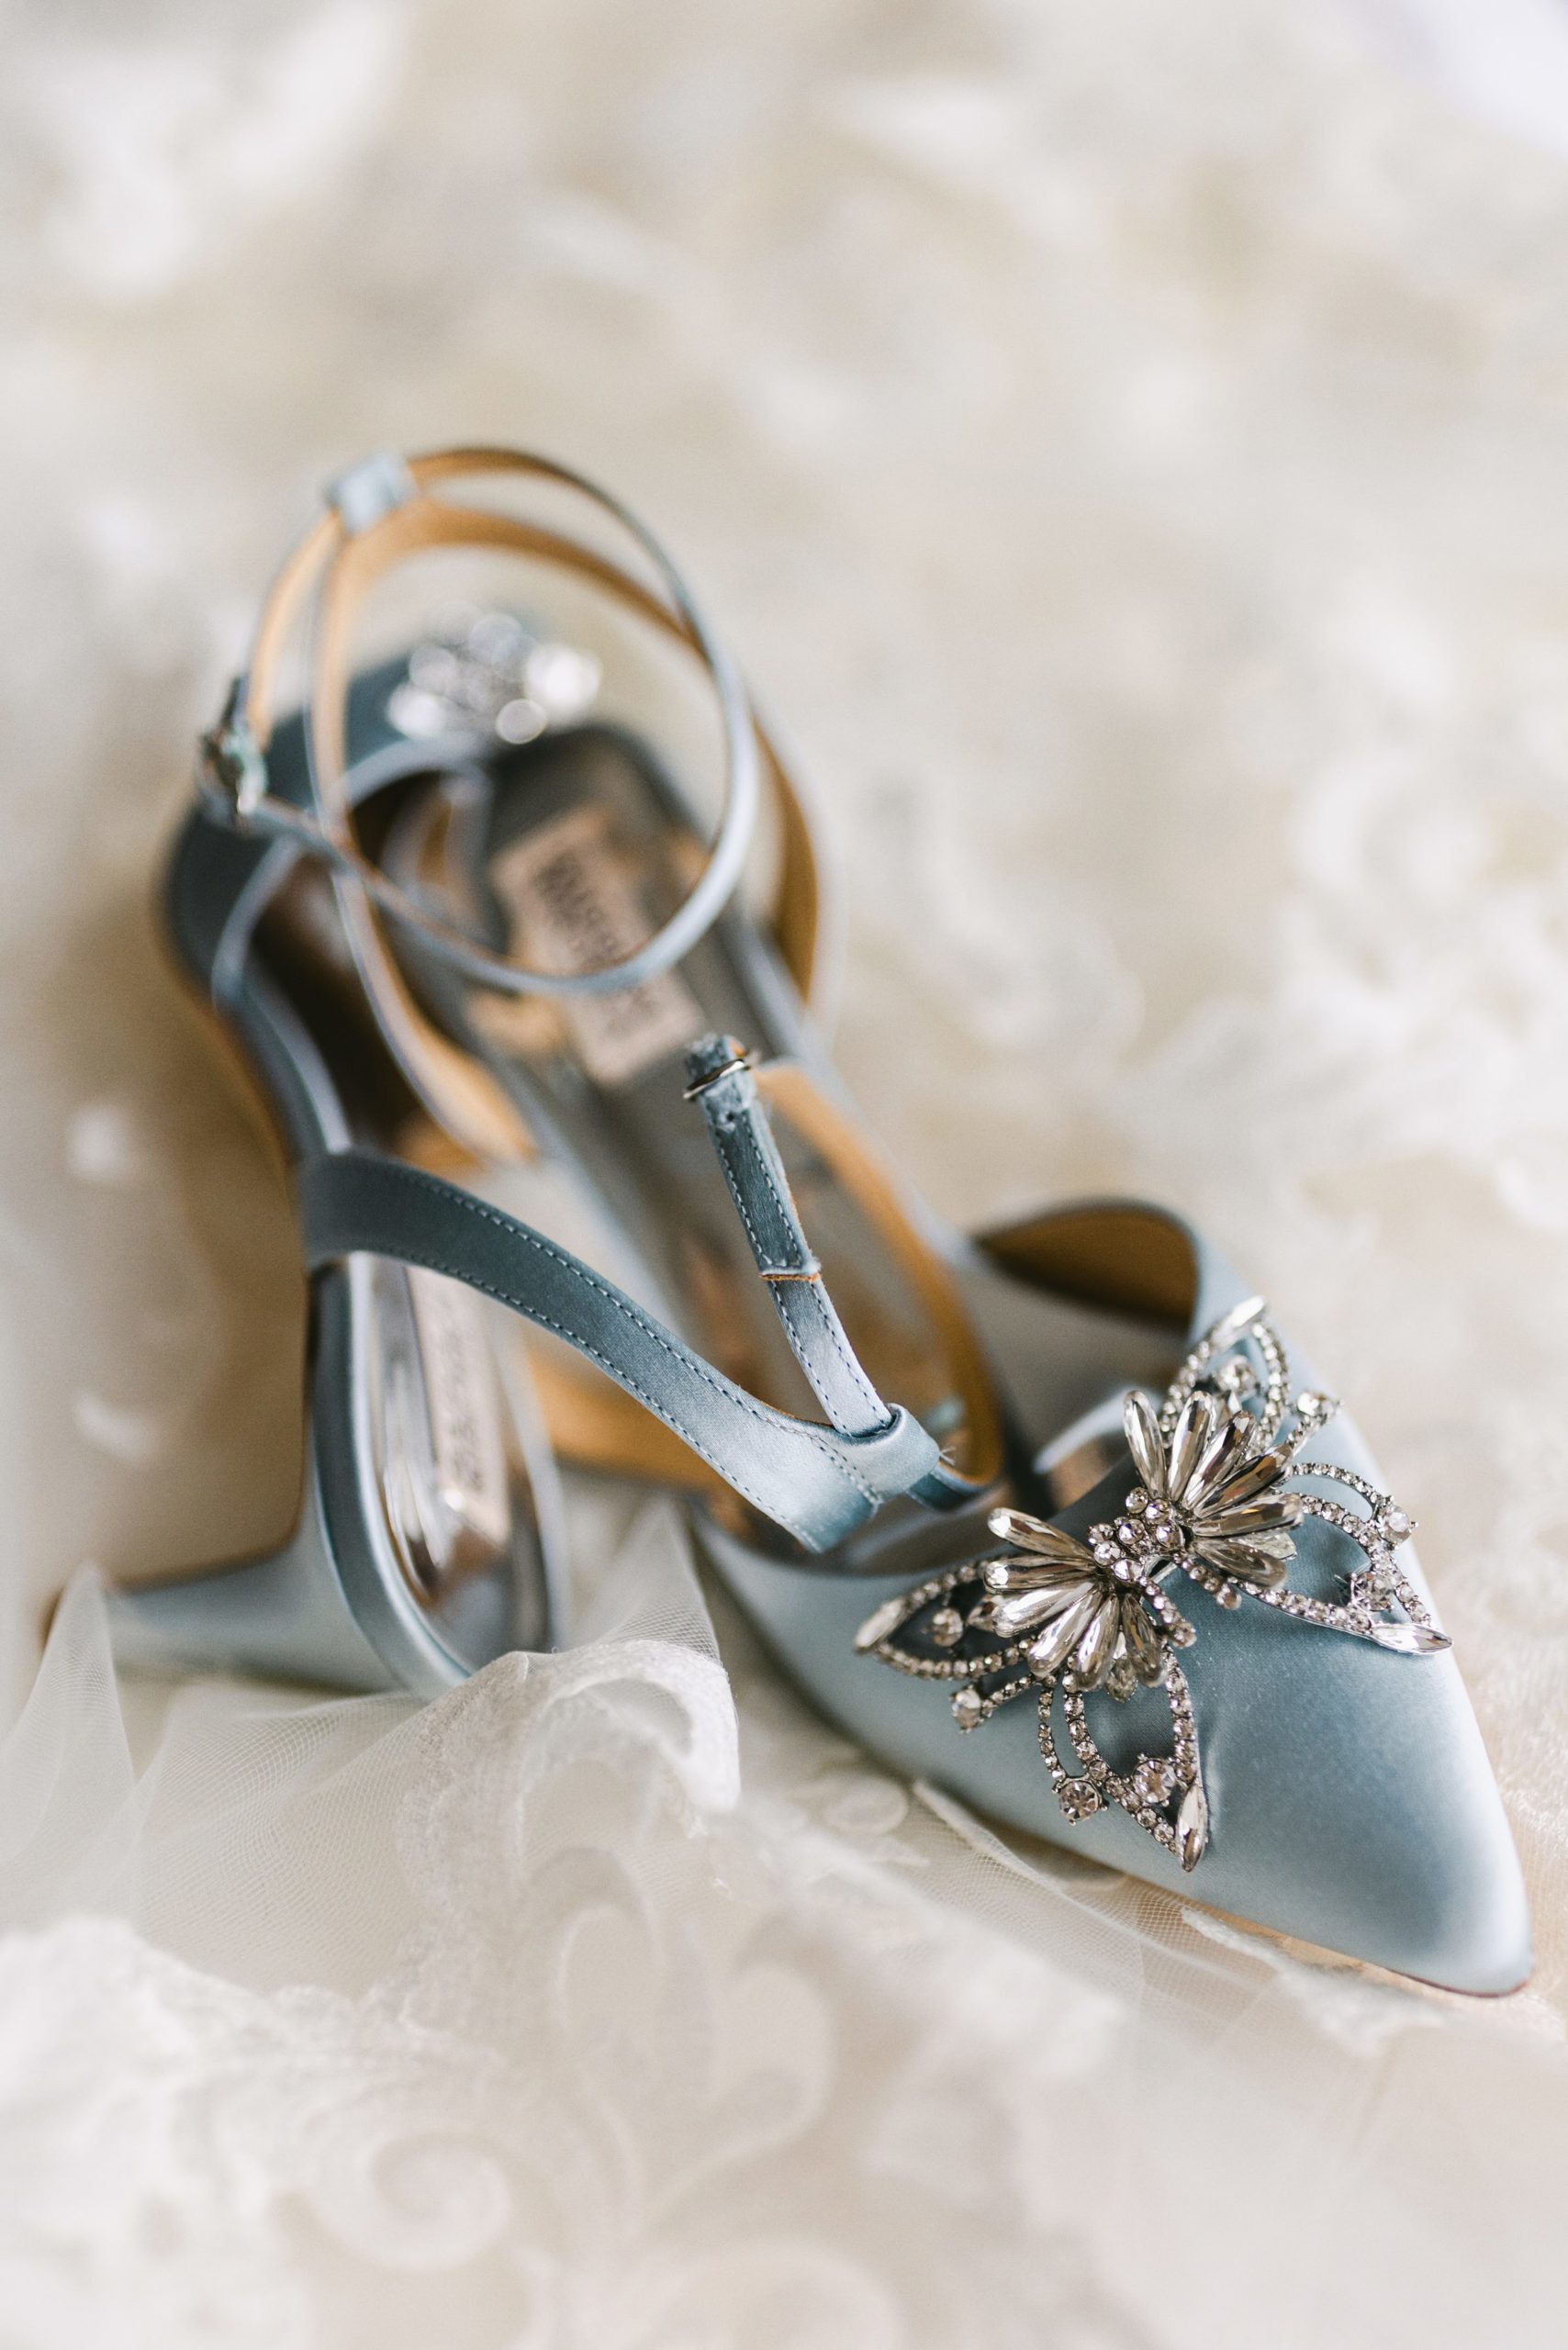 Jimmy Choo Wedding Shoes at the Detroit Mariott by Michele Maloney Photography